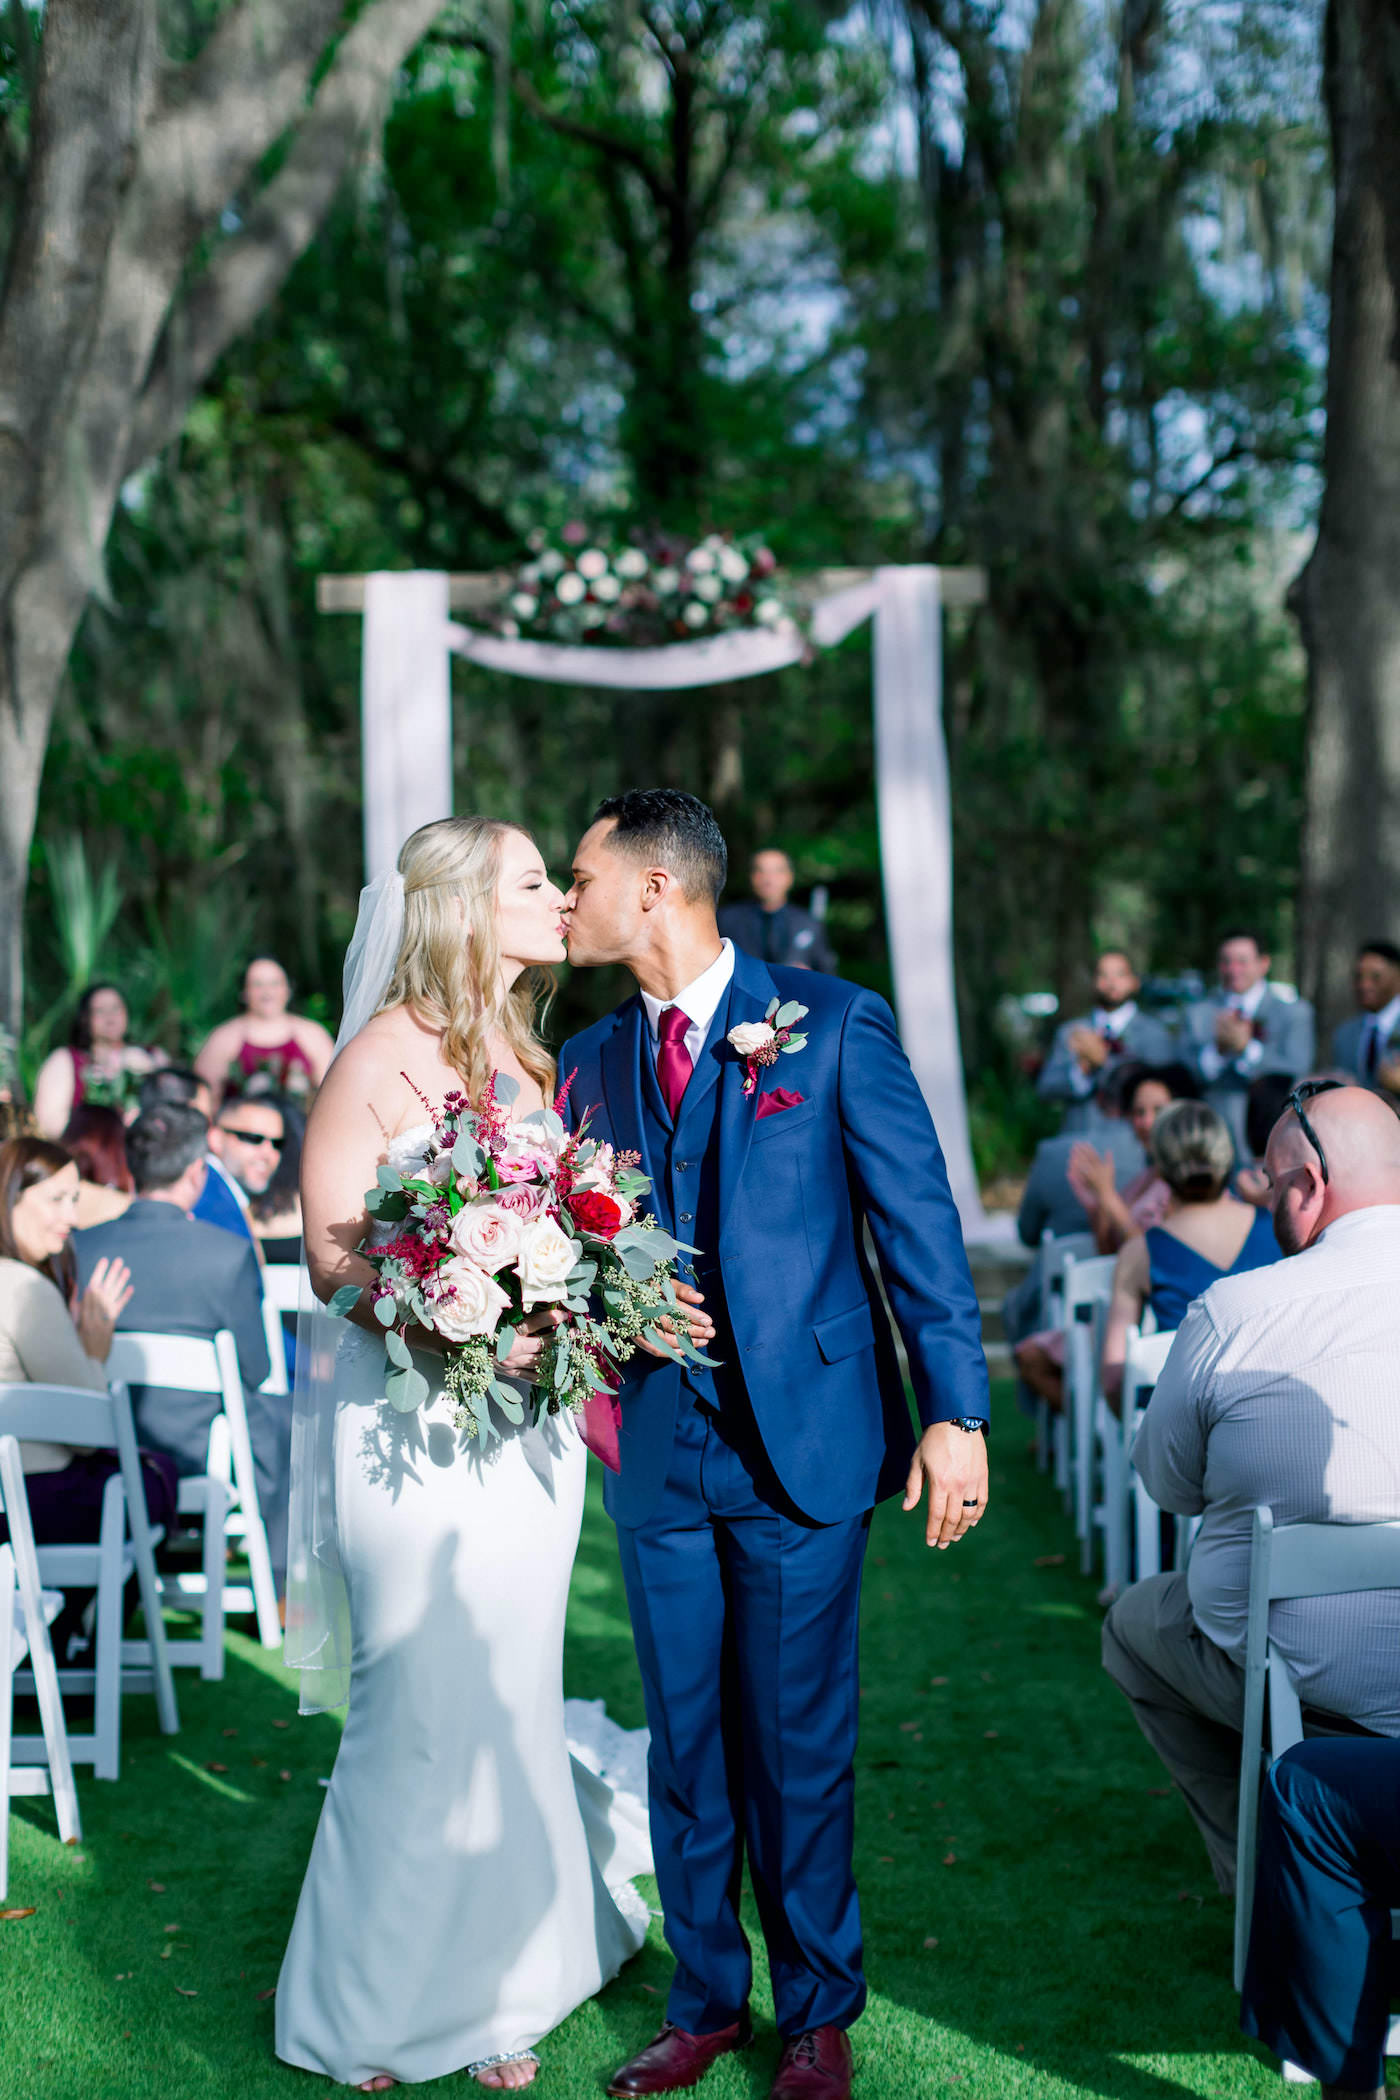 Bride and Groom Walking Down the Aisle after Outdoor Florida Ceremony | Burgundy and Blush Pink Wedding | Navy Blue Groom Suit